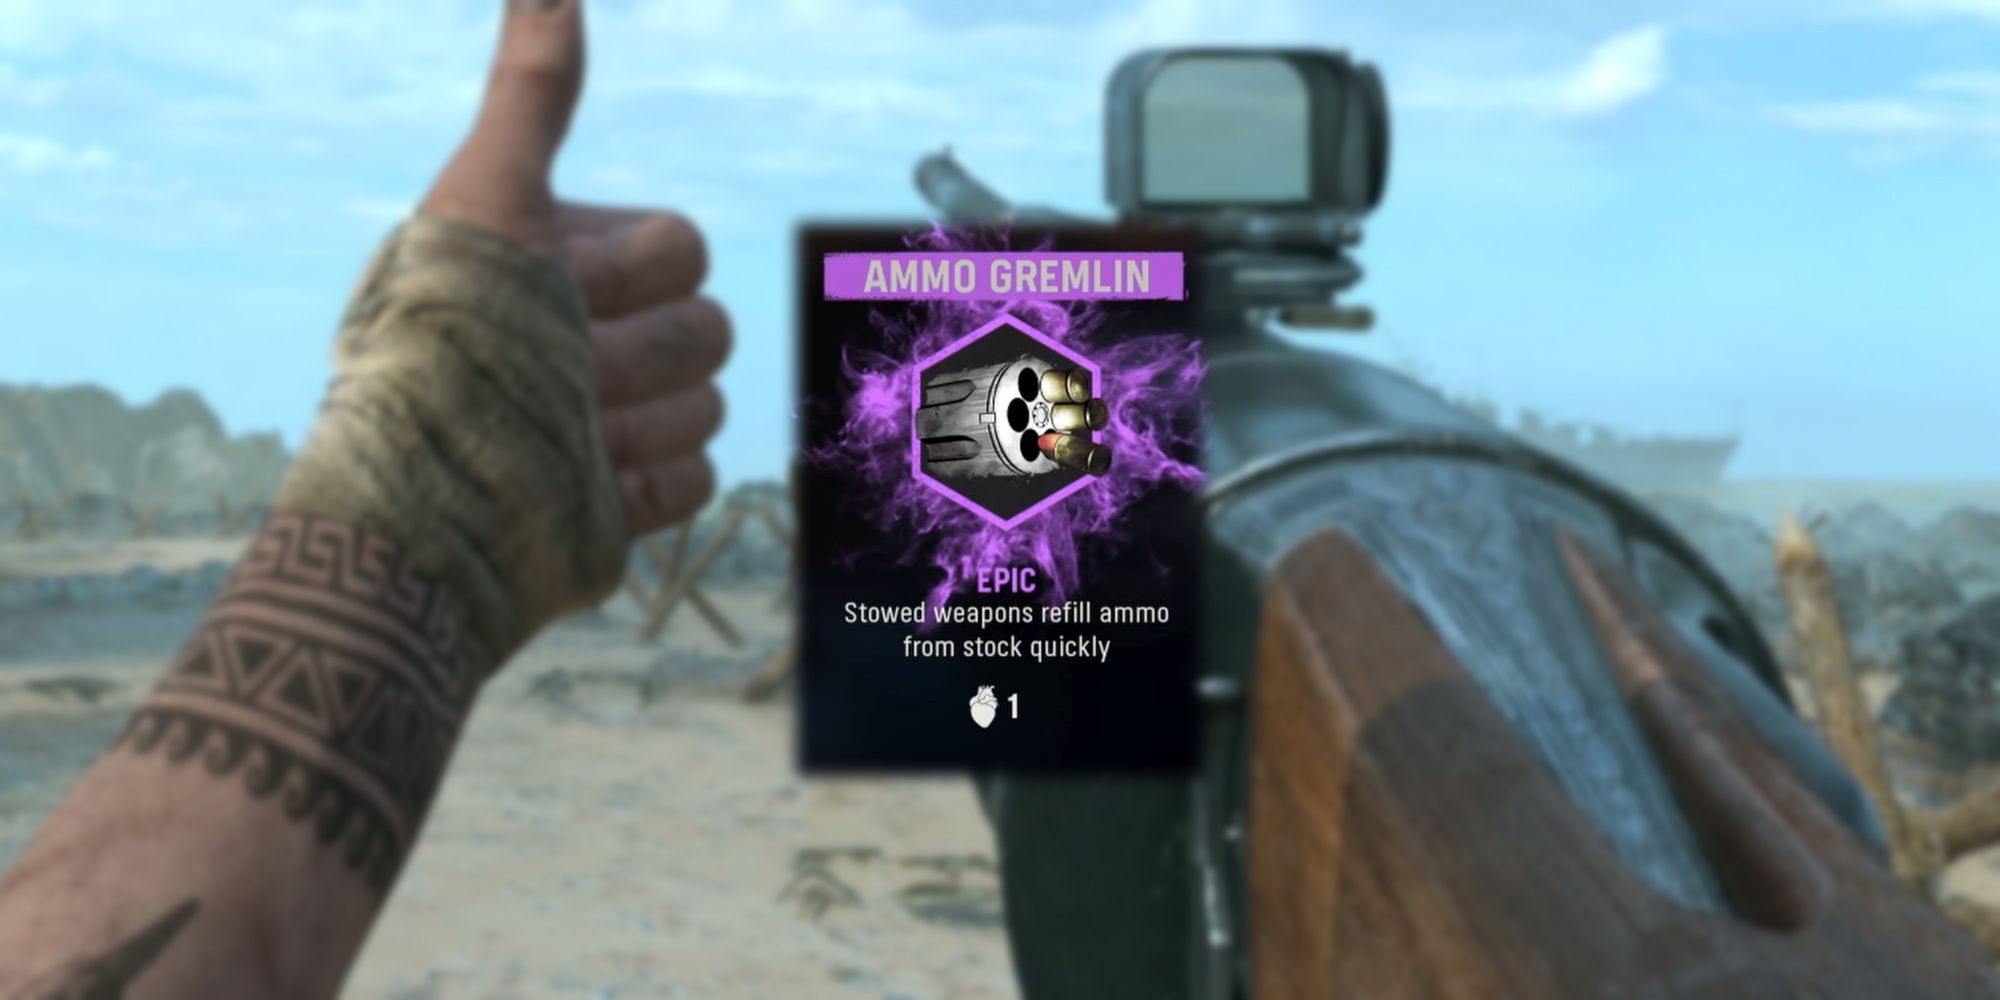 Call of Duty Vanguard Zombies - Ammo Gremlin Description In-Game Overlaid On Image Of Operator Giving Thumbs Up With Revolving Shotgun